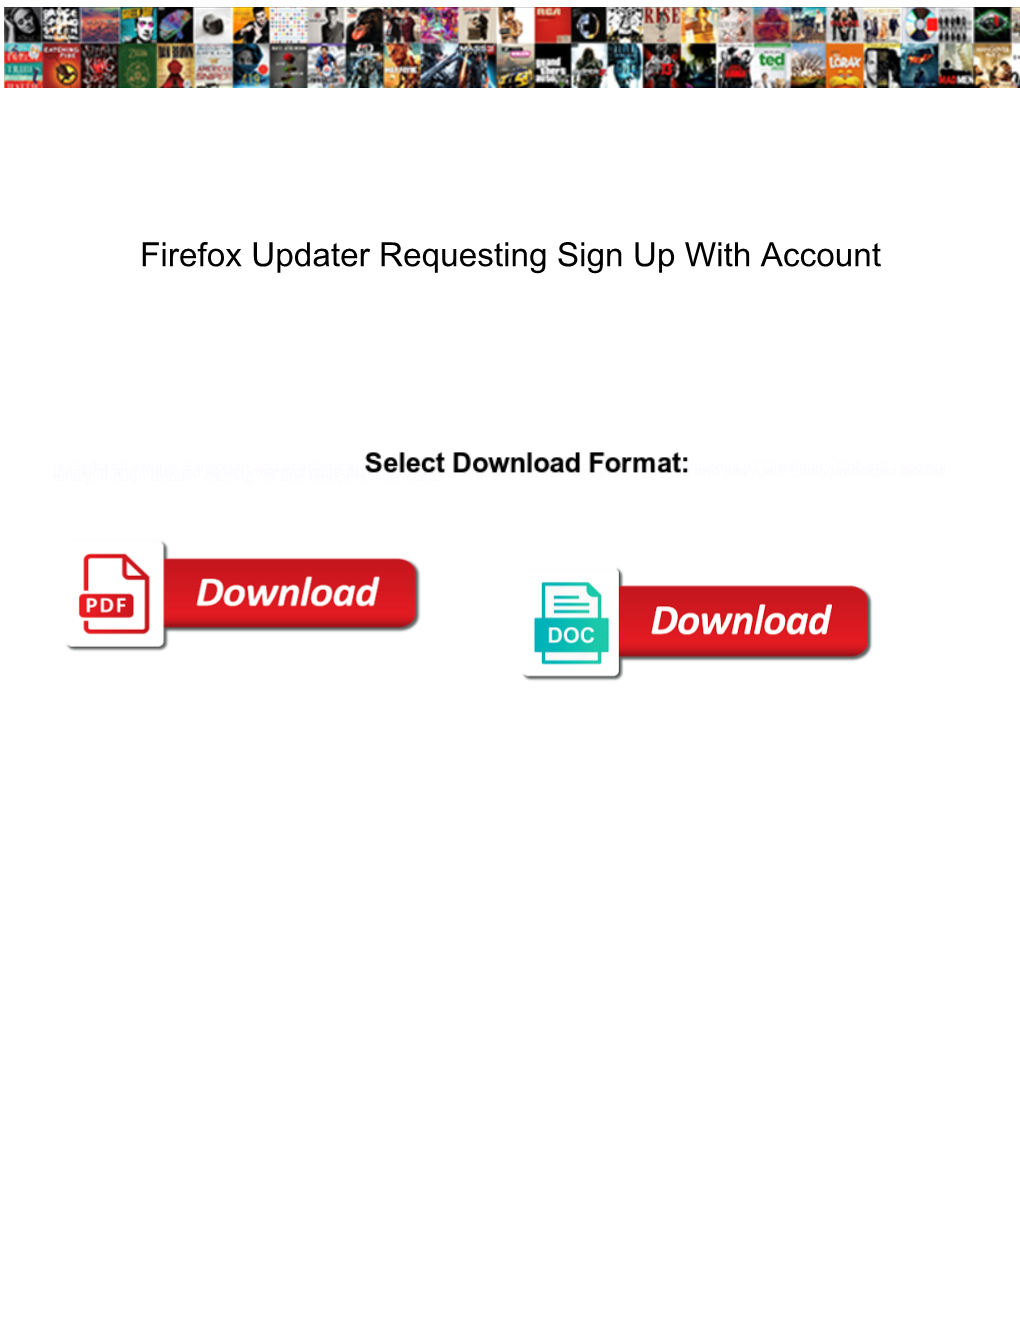 Firefox Updater Requesting Sign up with Account